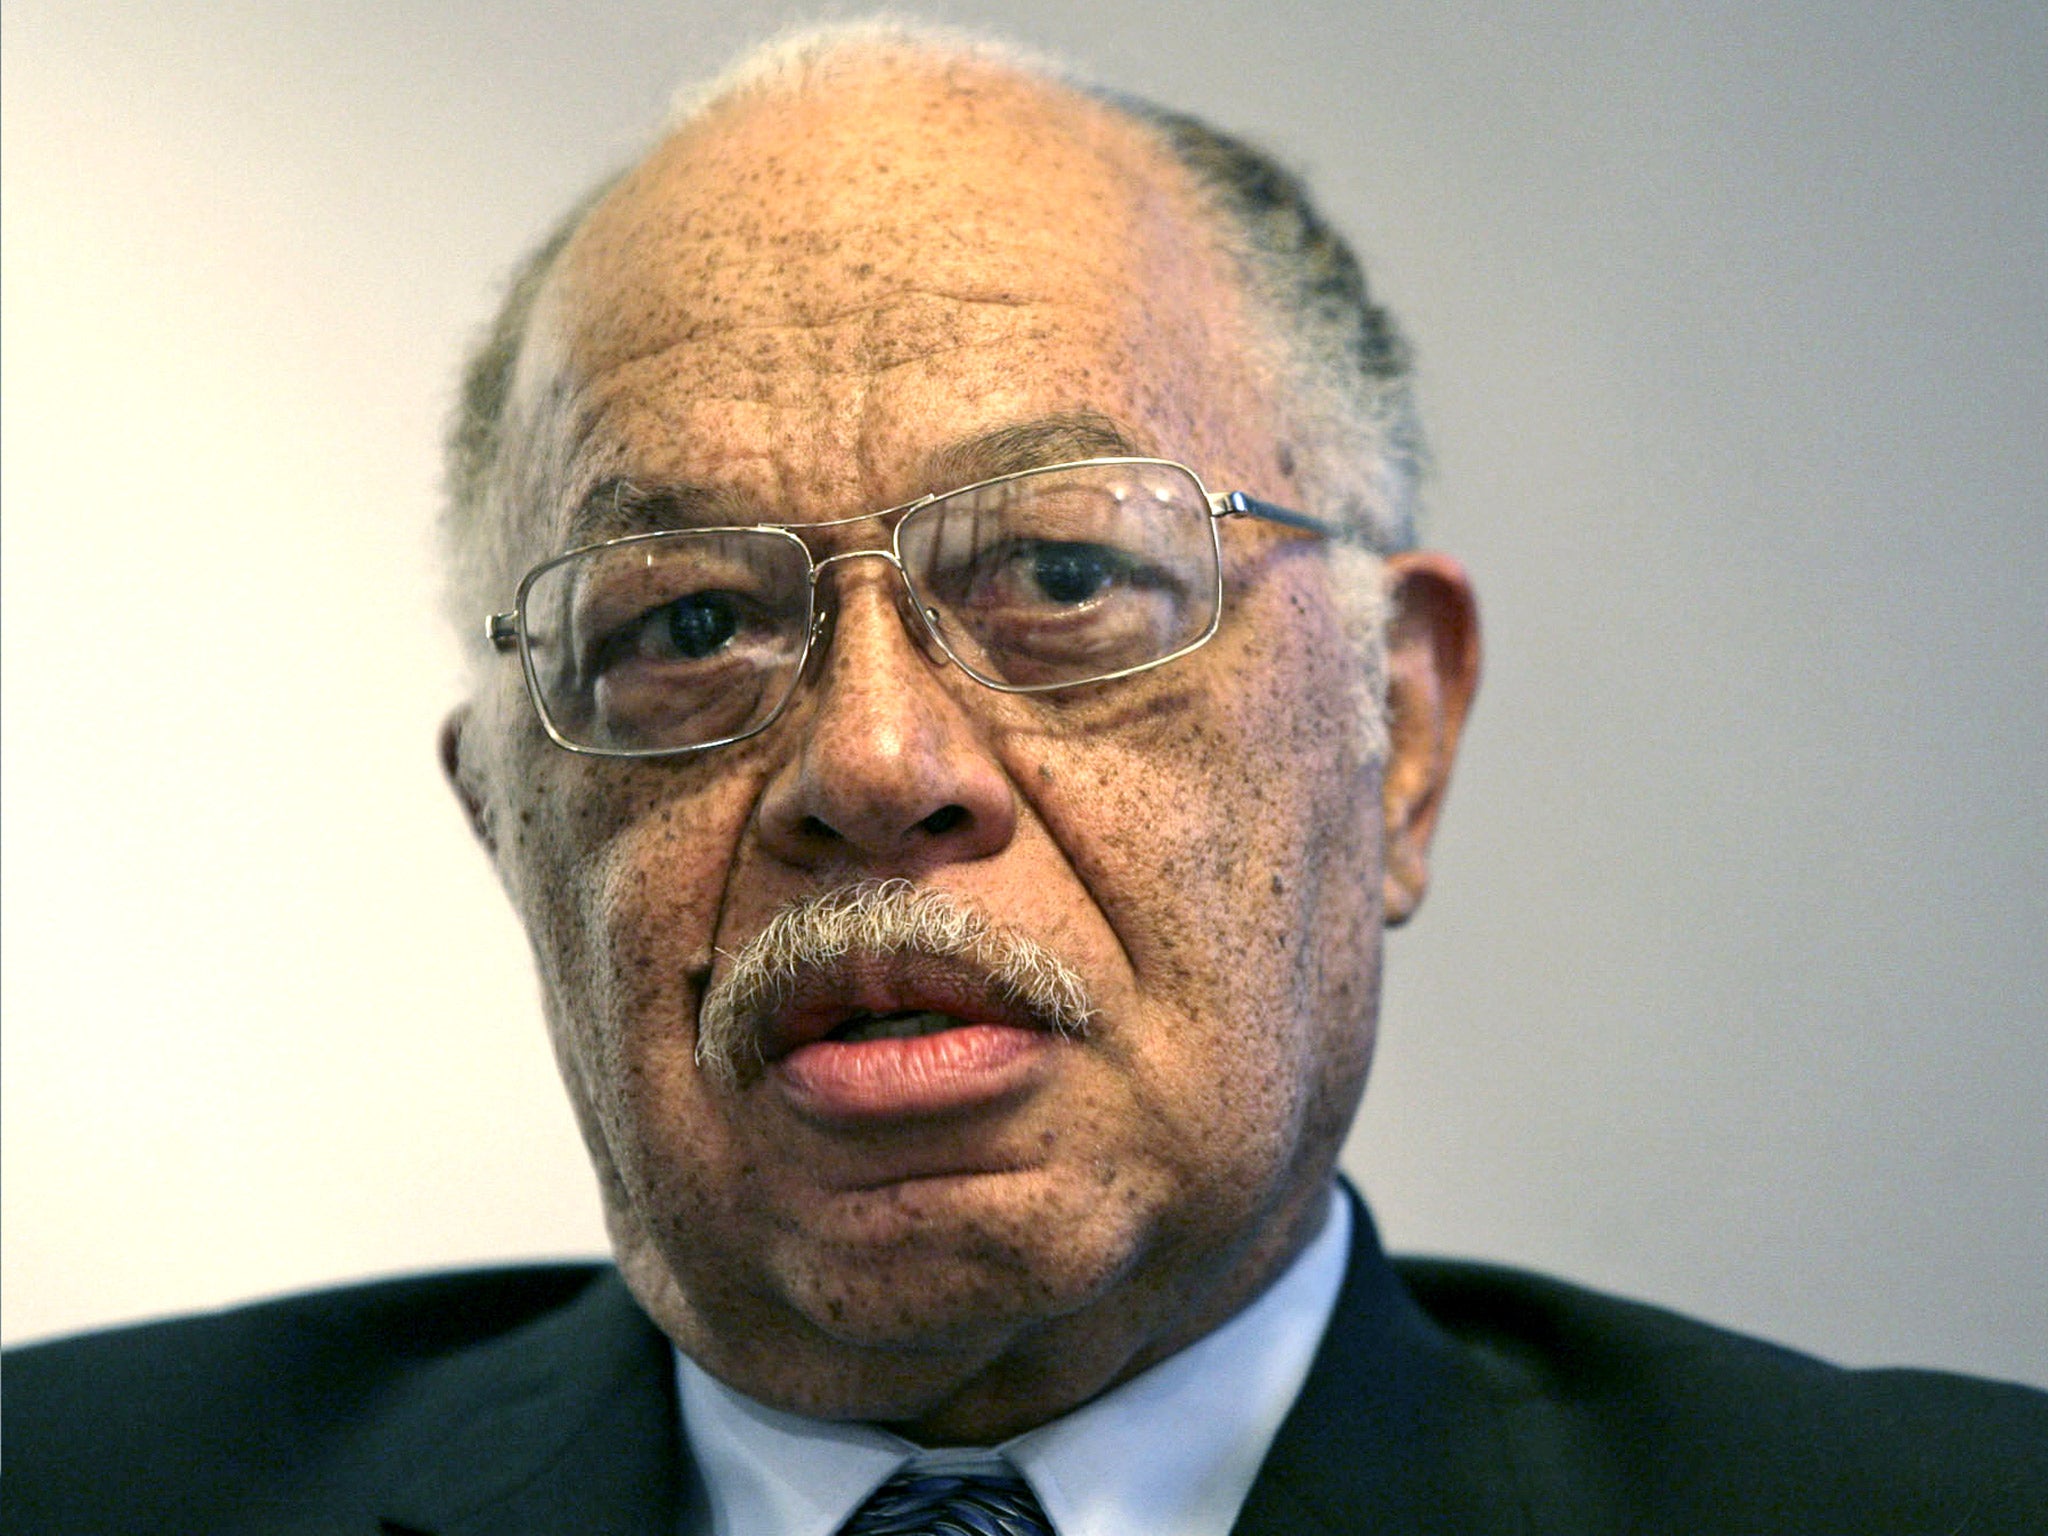 Kermit Gosnell ran a backstreet abortion clinic dubbed the ‘house of horrors’